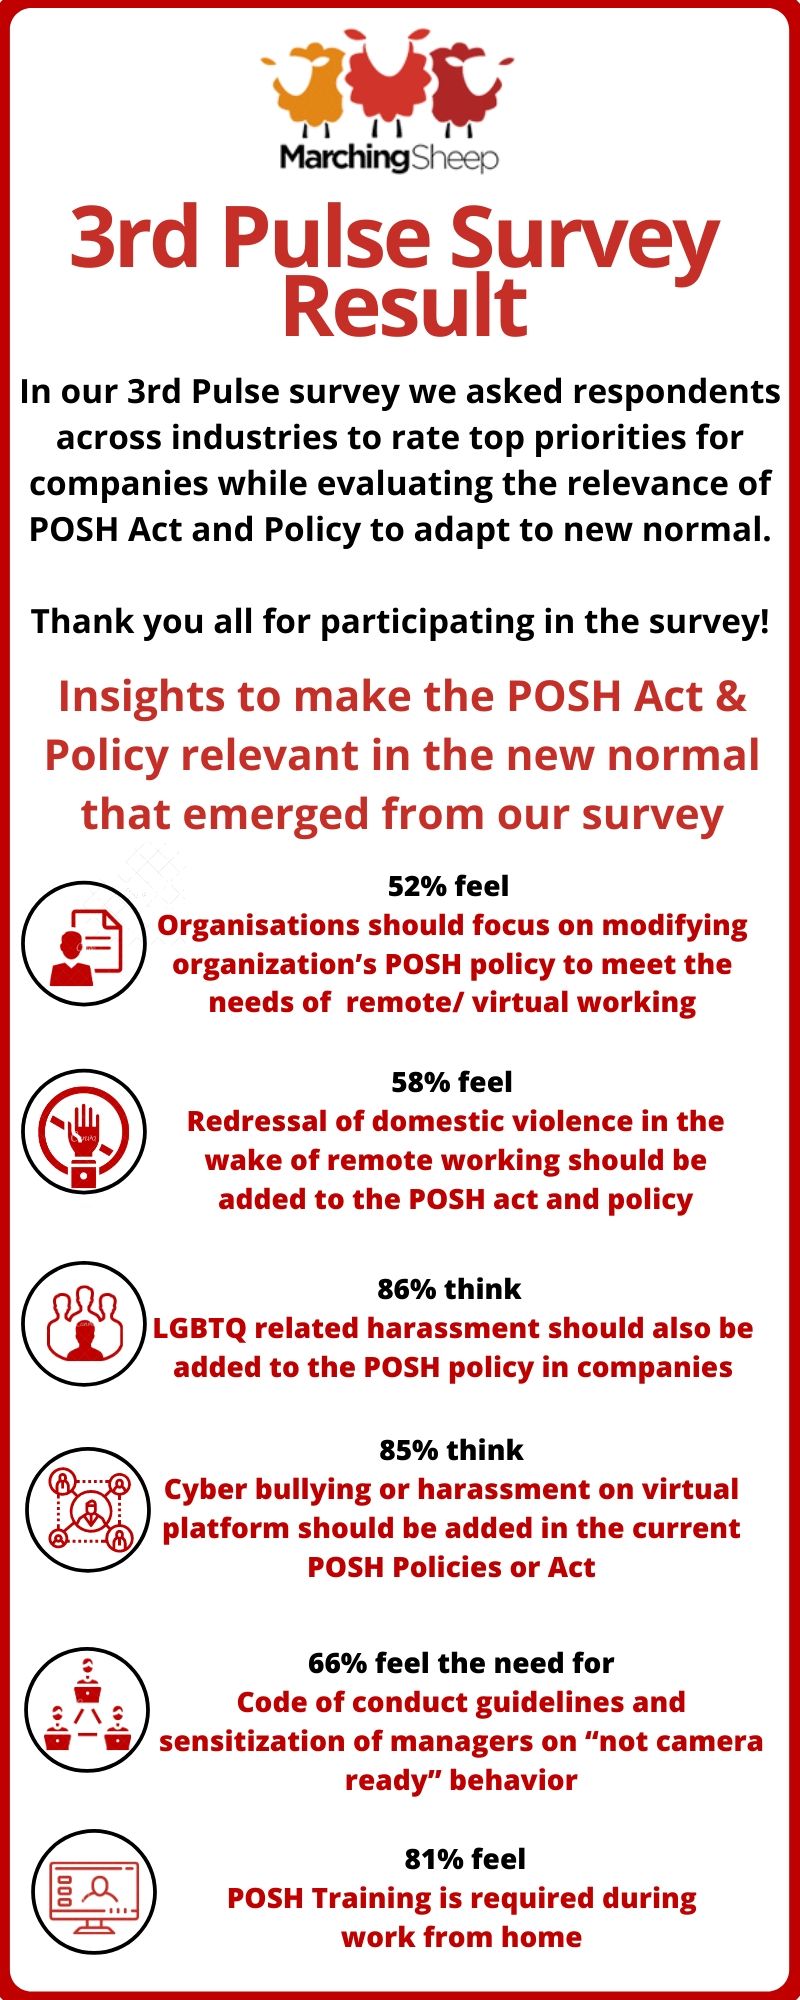 3rd-pulse-survey-results-on-the-relevance-of-posh-act-and-policy-in-new-normal